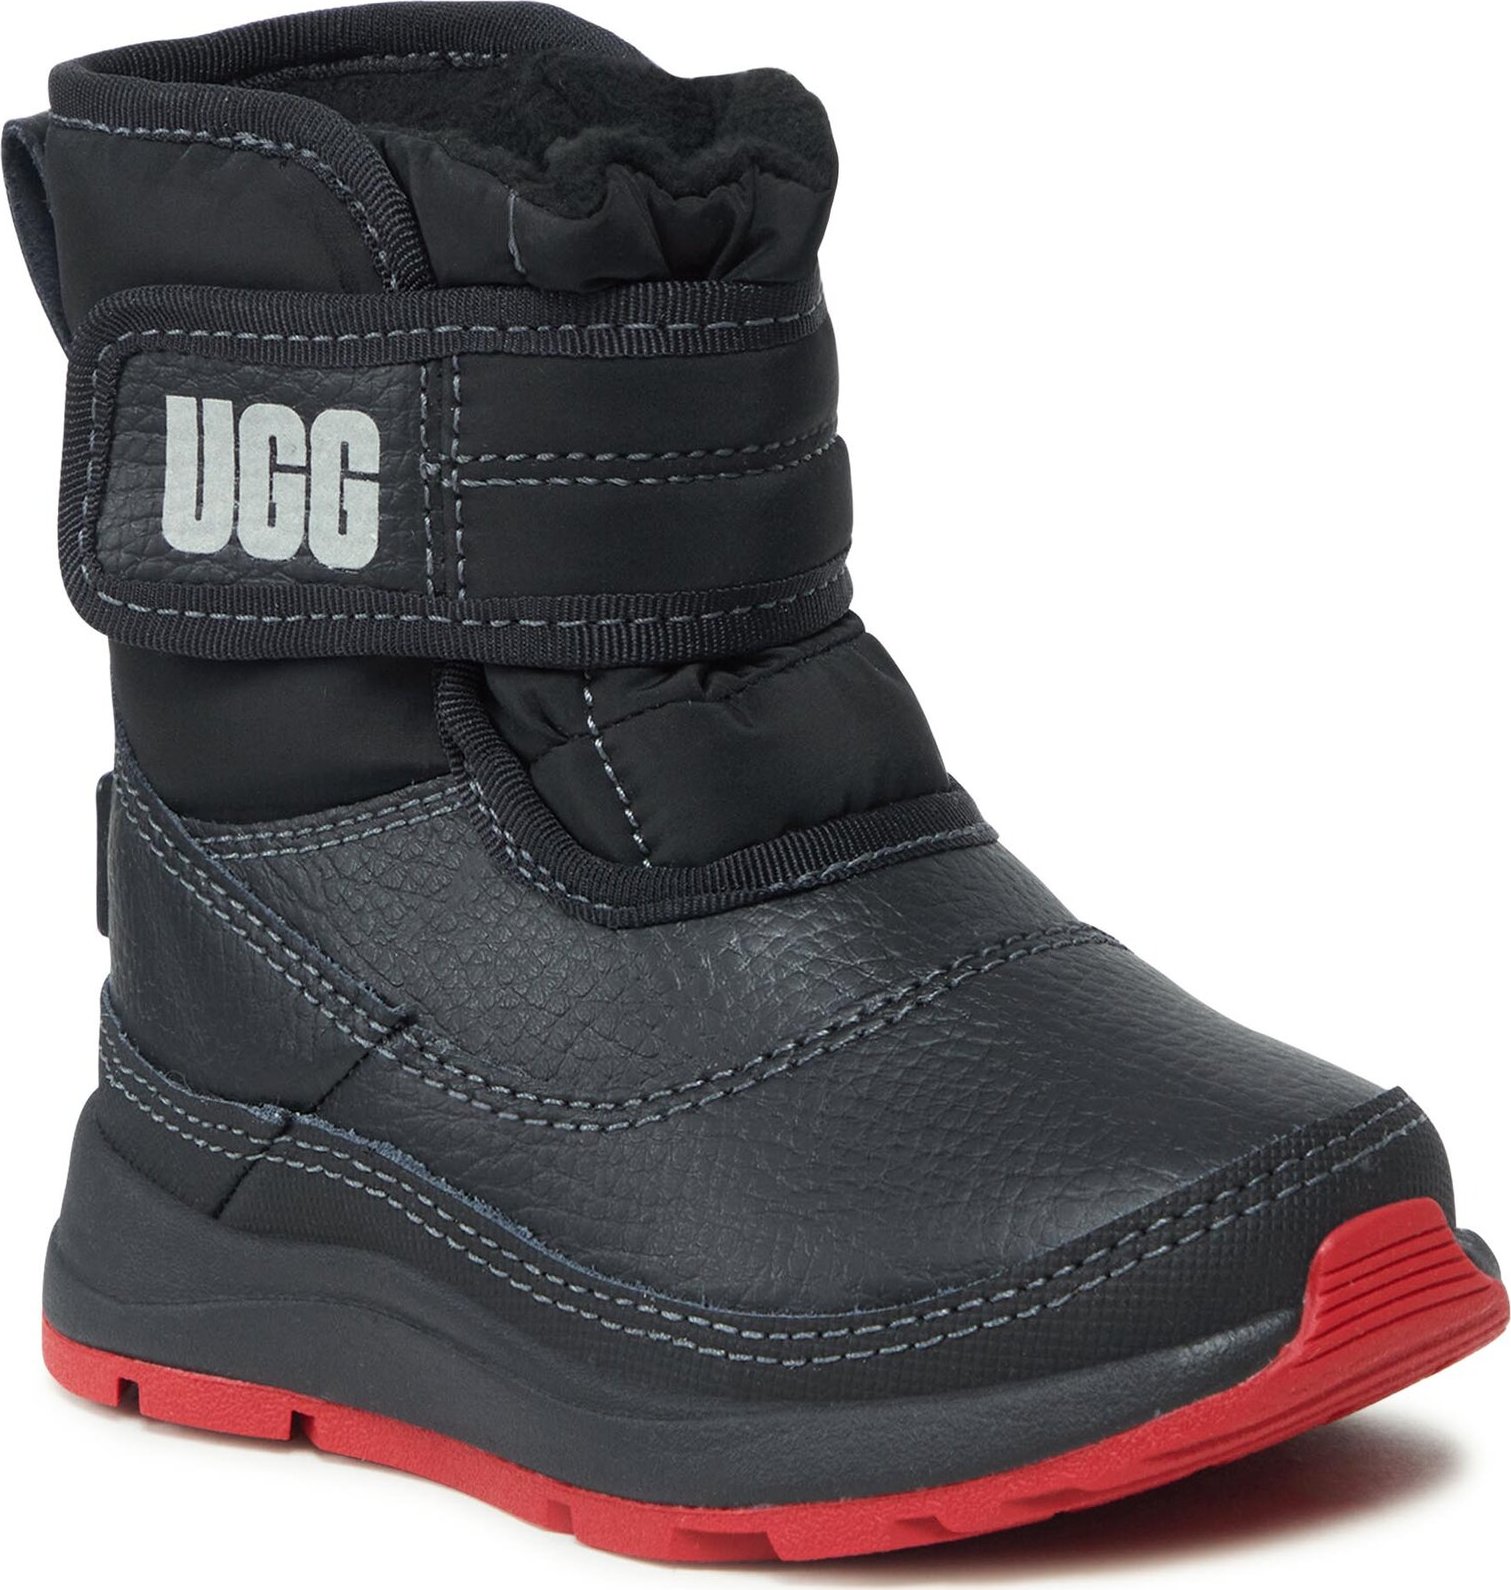 Sněhule Ugg T Taney Weather 1122399T Blk